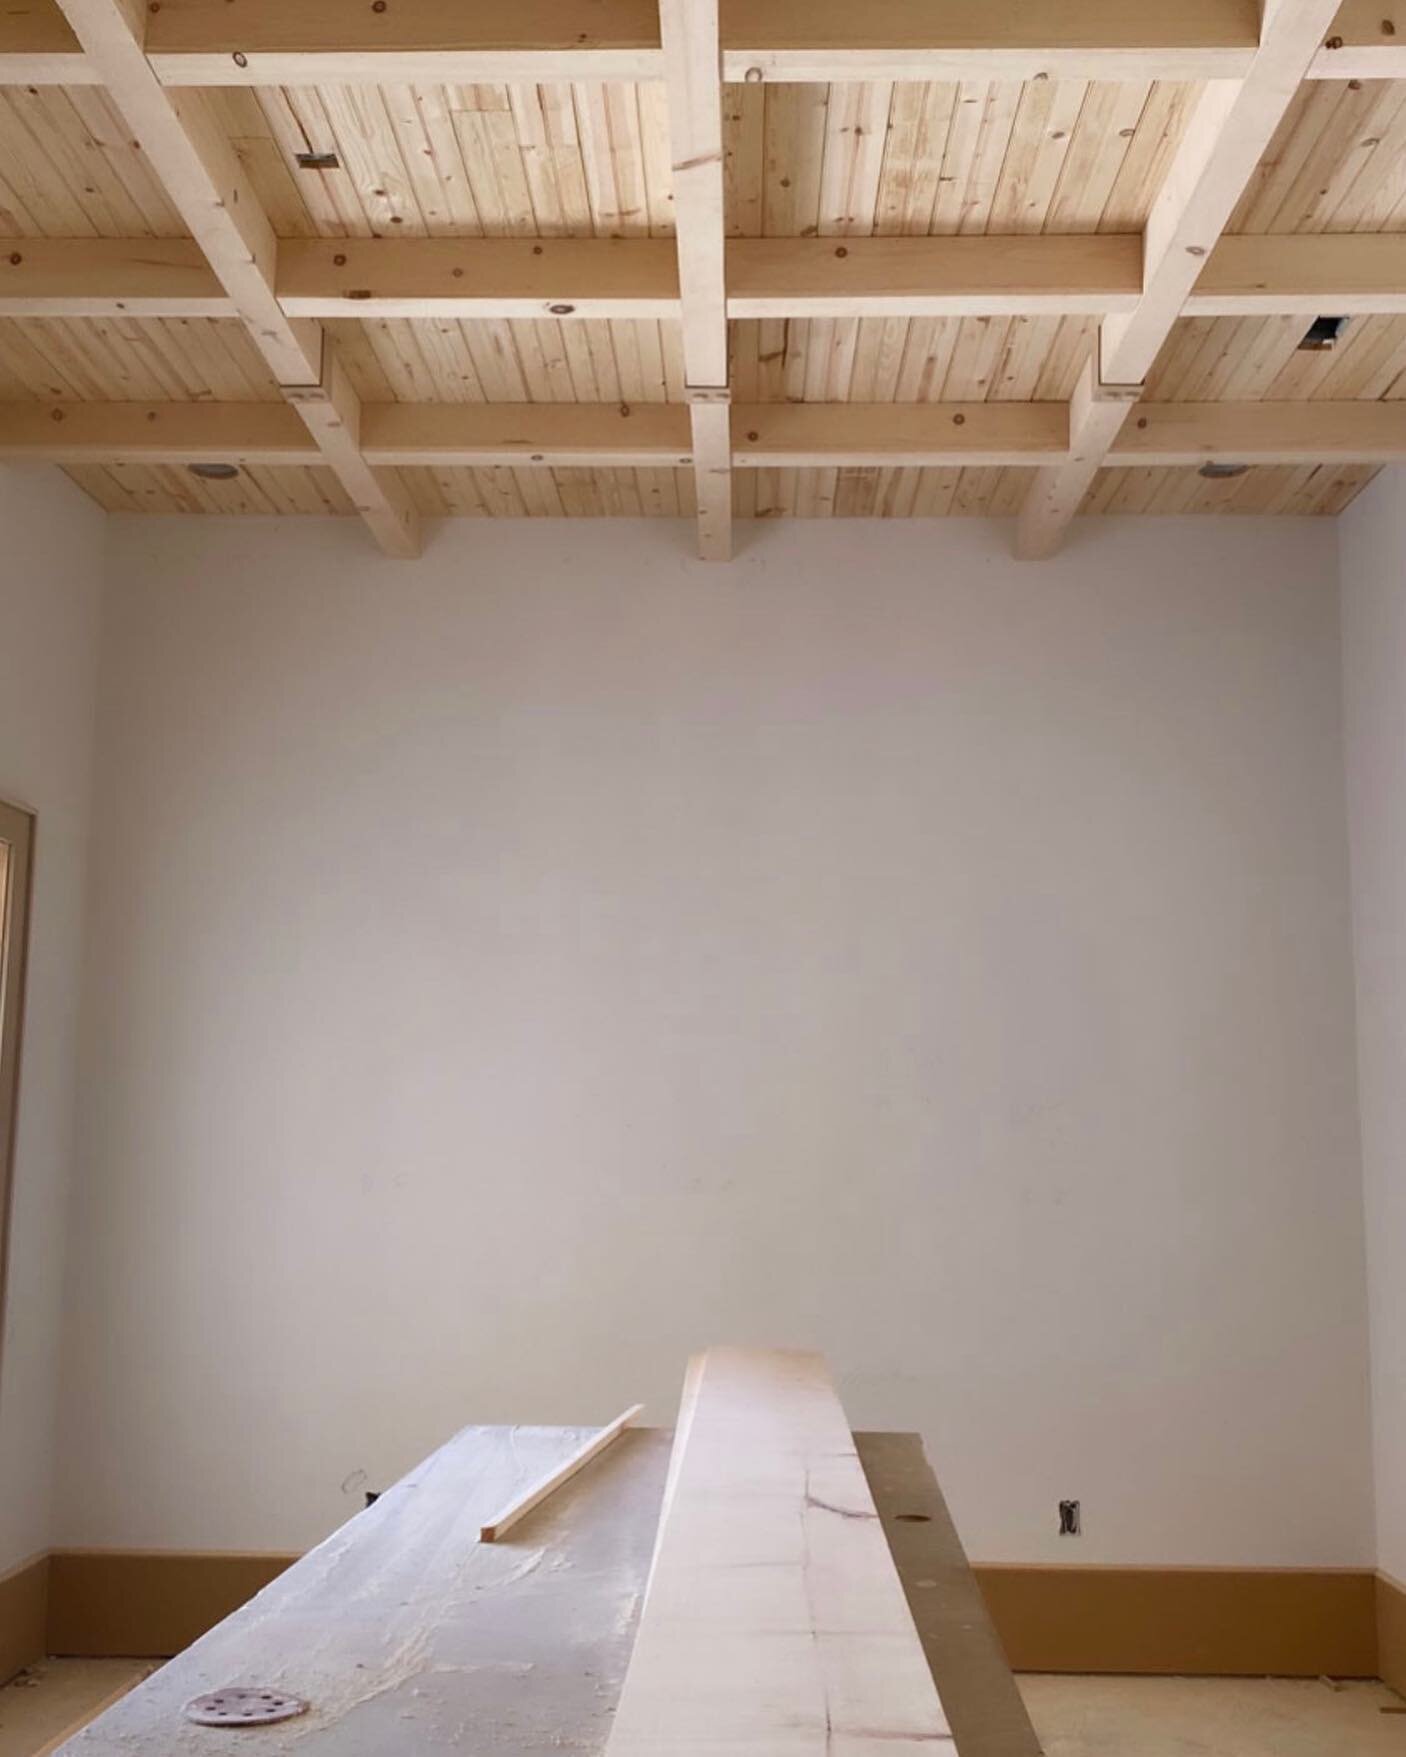 Tongue and groove ceiling details with applied beams.